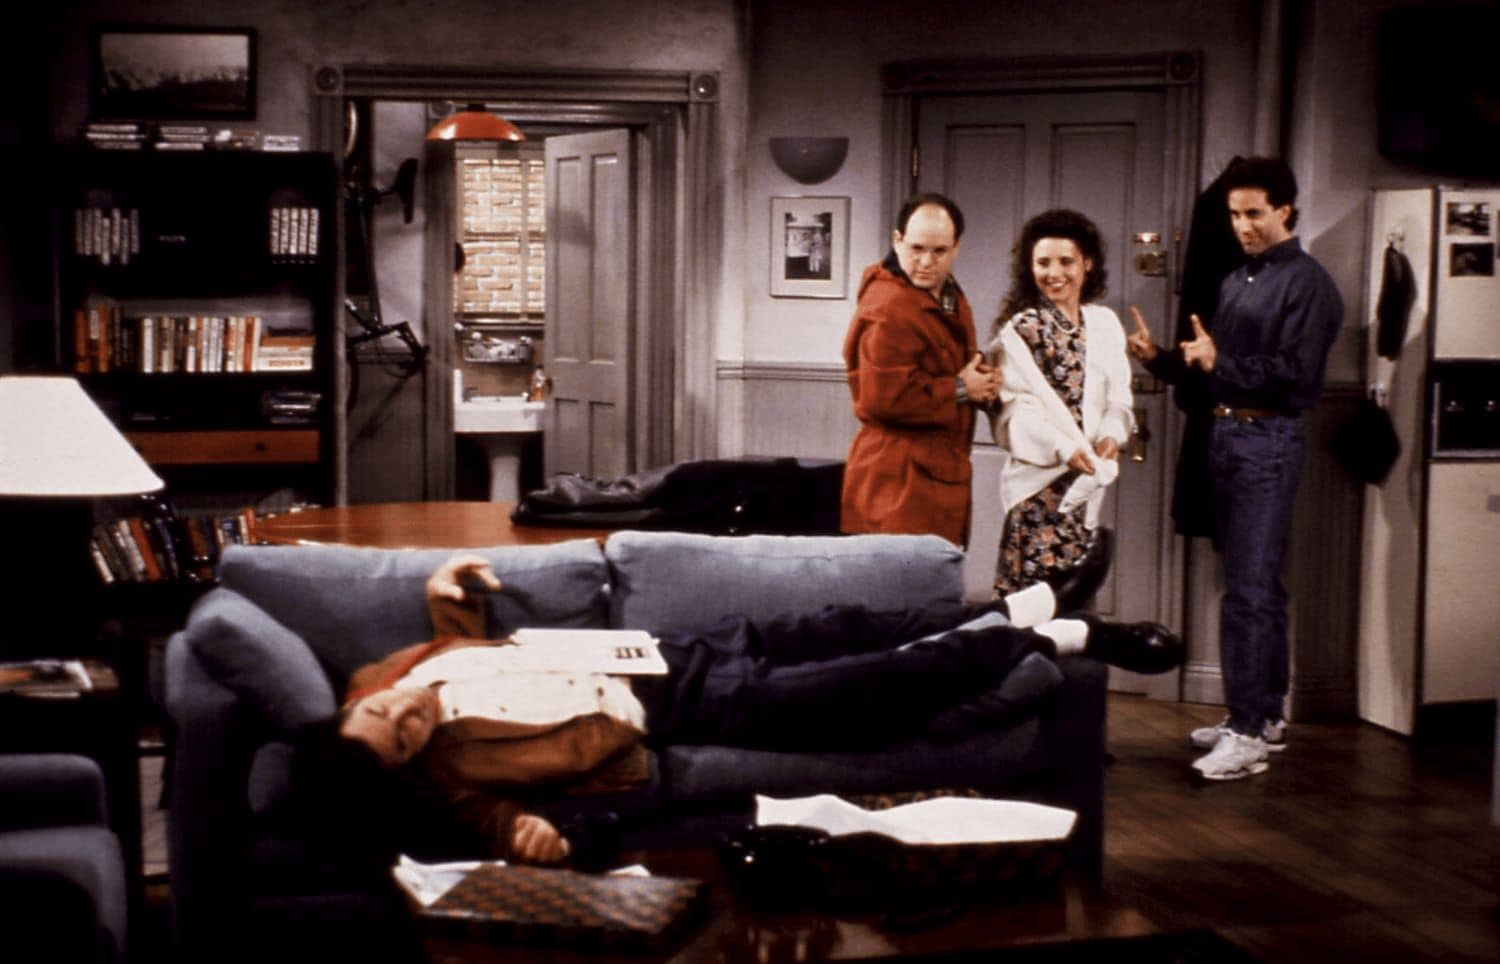 The 10 Best Sitcoms Ever Made, Ranked by Popularity